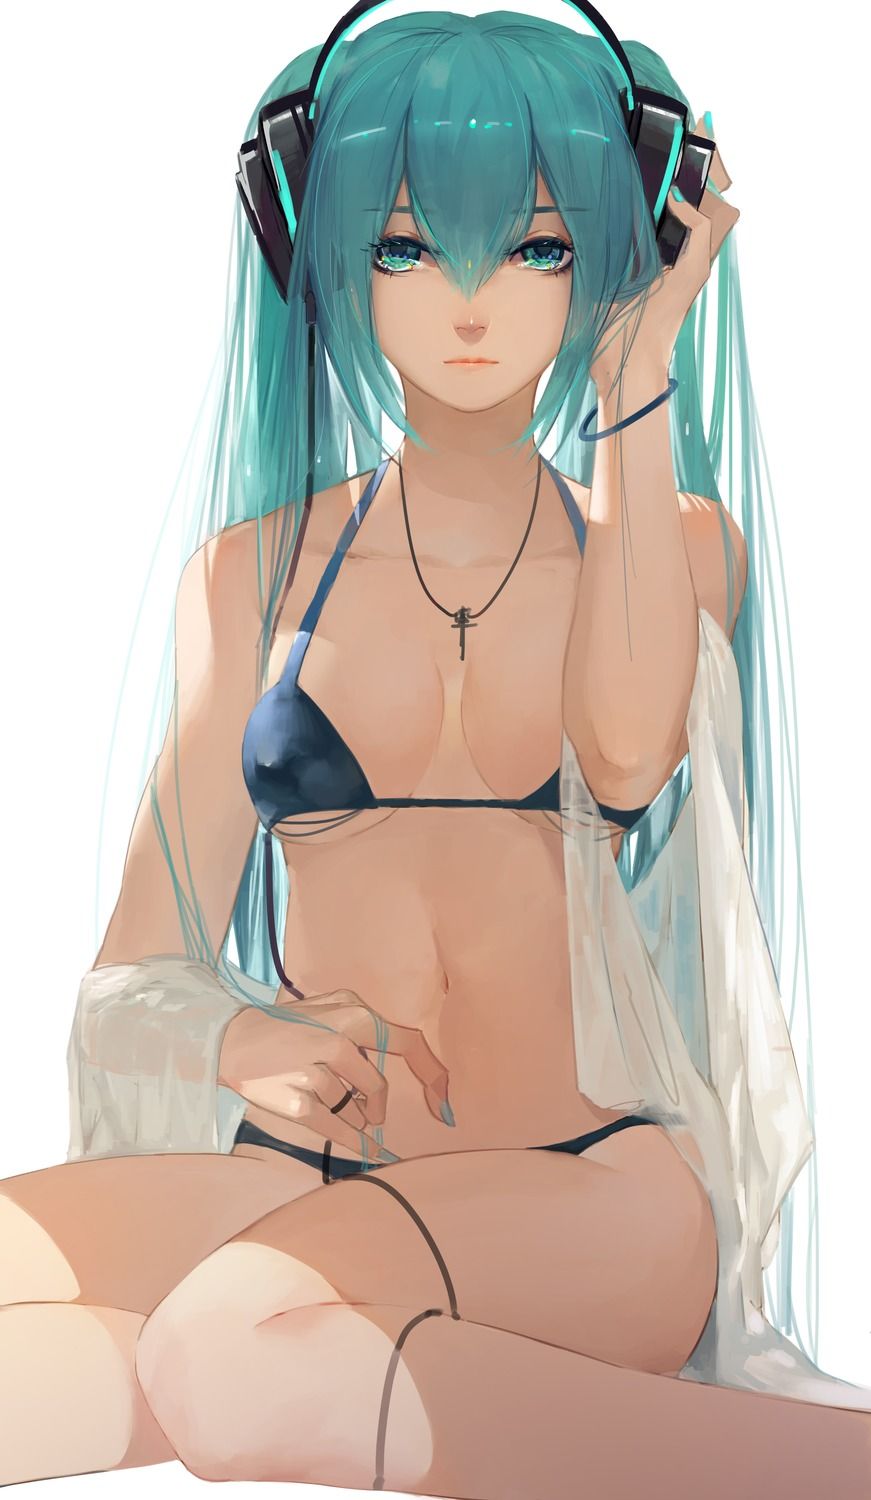 [Vocaloid] hatsune miku, imaging-related images and five! [Pictures and wallpapers] (Vocaloid VOCALOID 13) 4